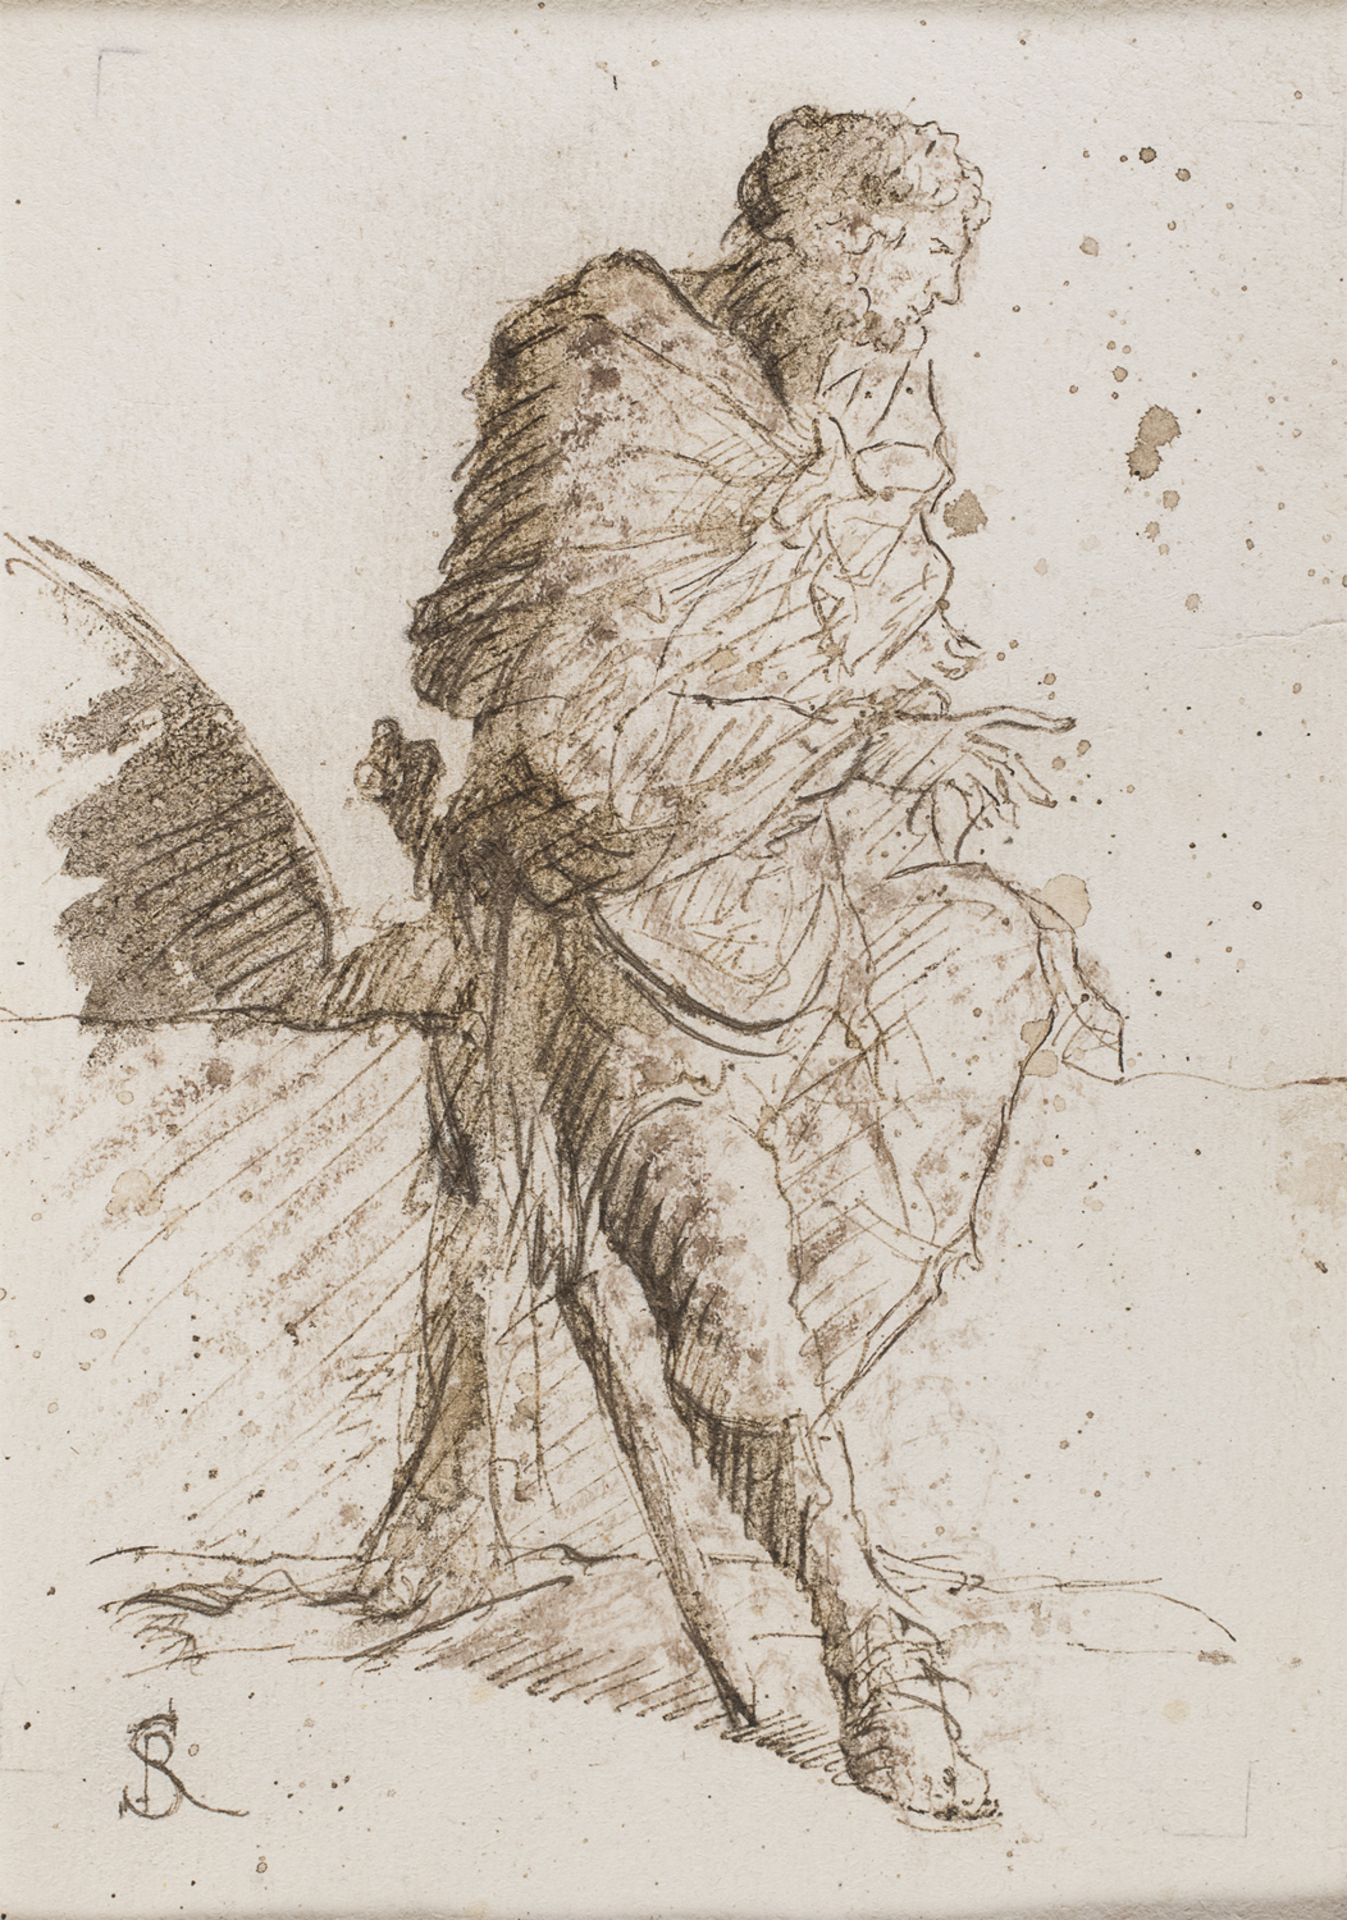 A PAIR OF INK DRAWINGS OF SOLDIERS BY A FOLLOWER OF SALVATOR ROSA